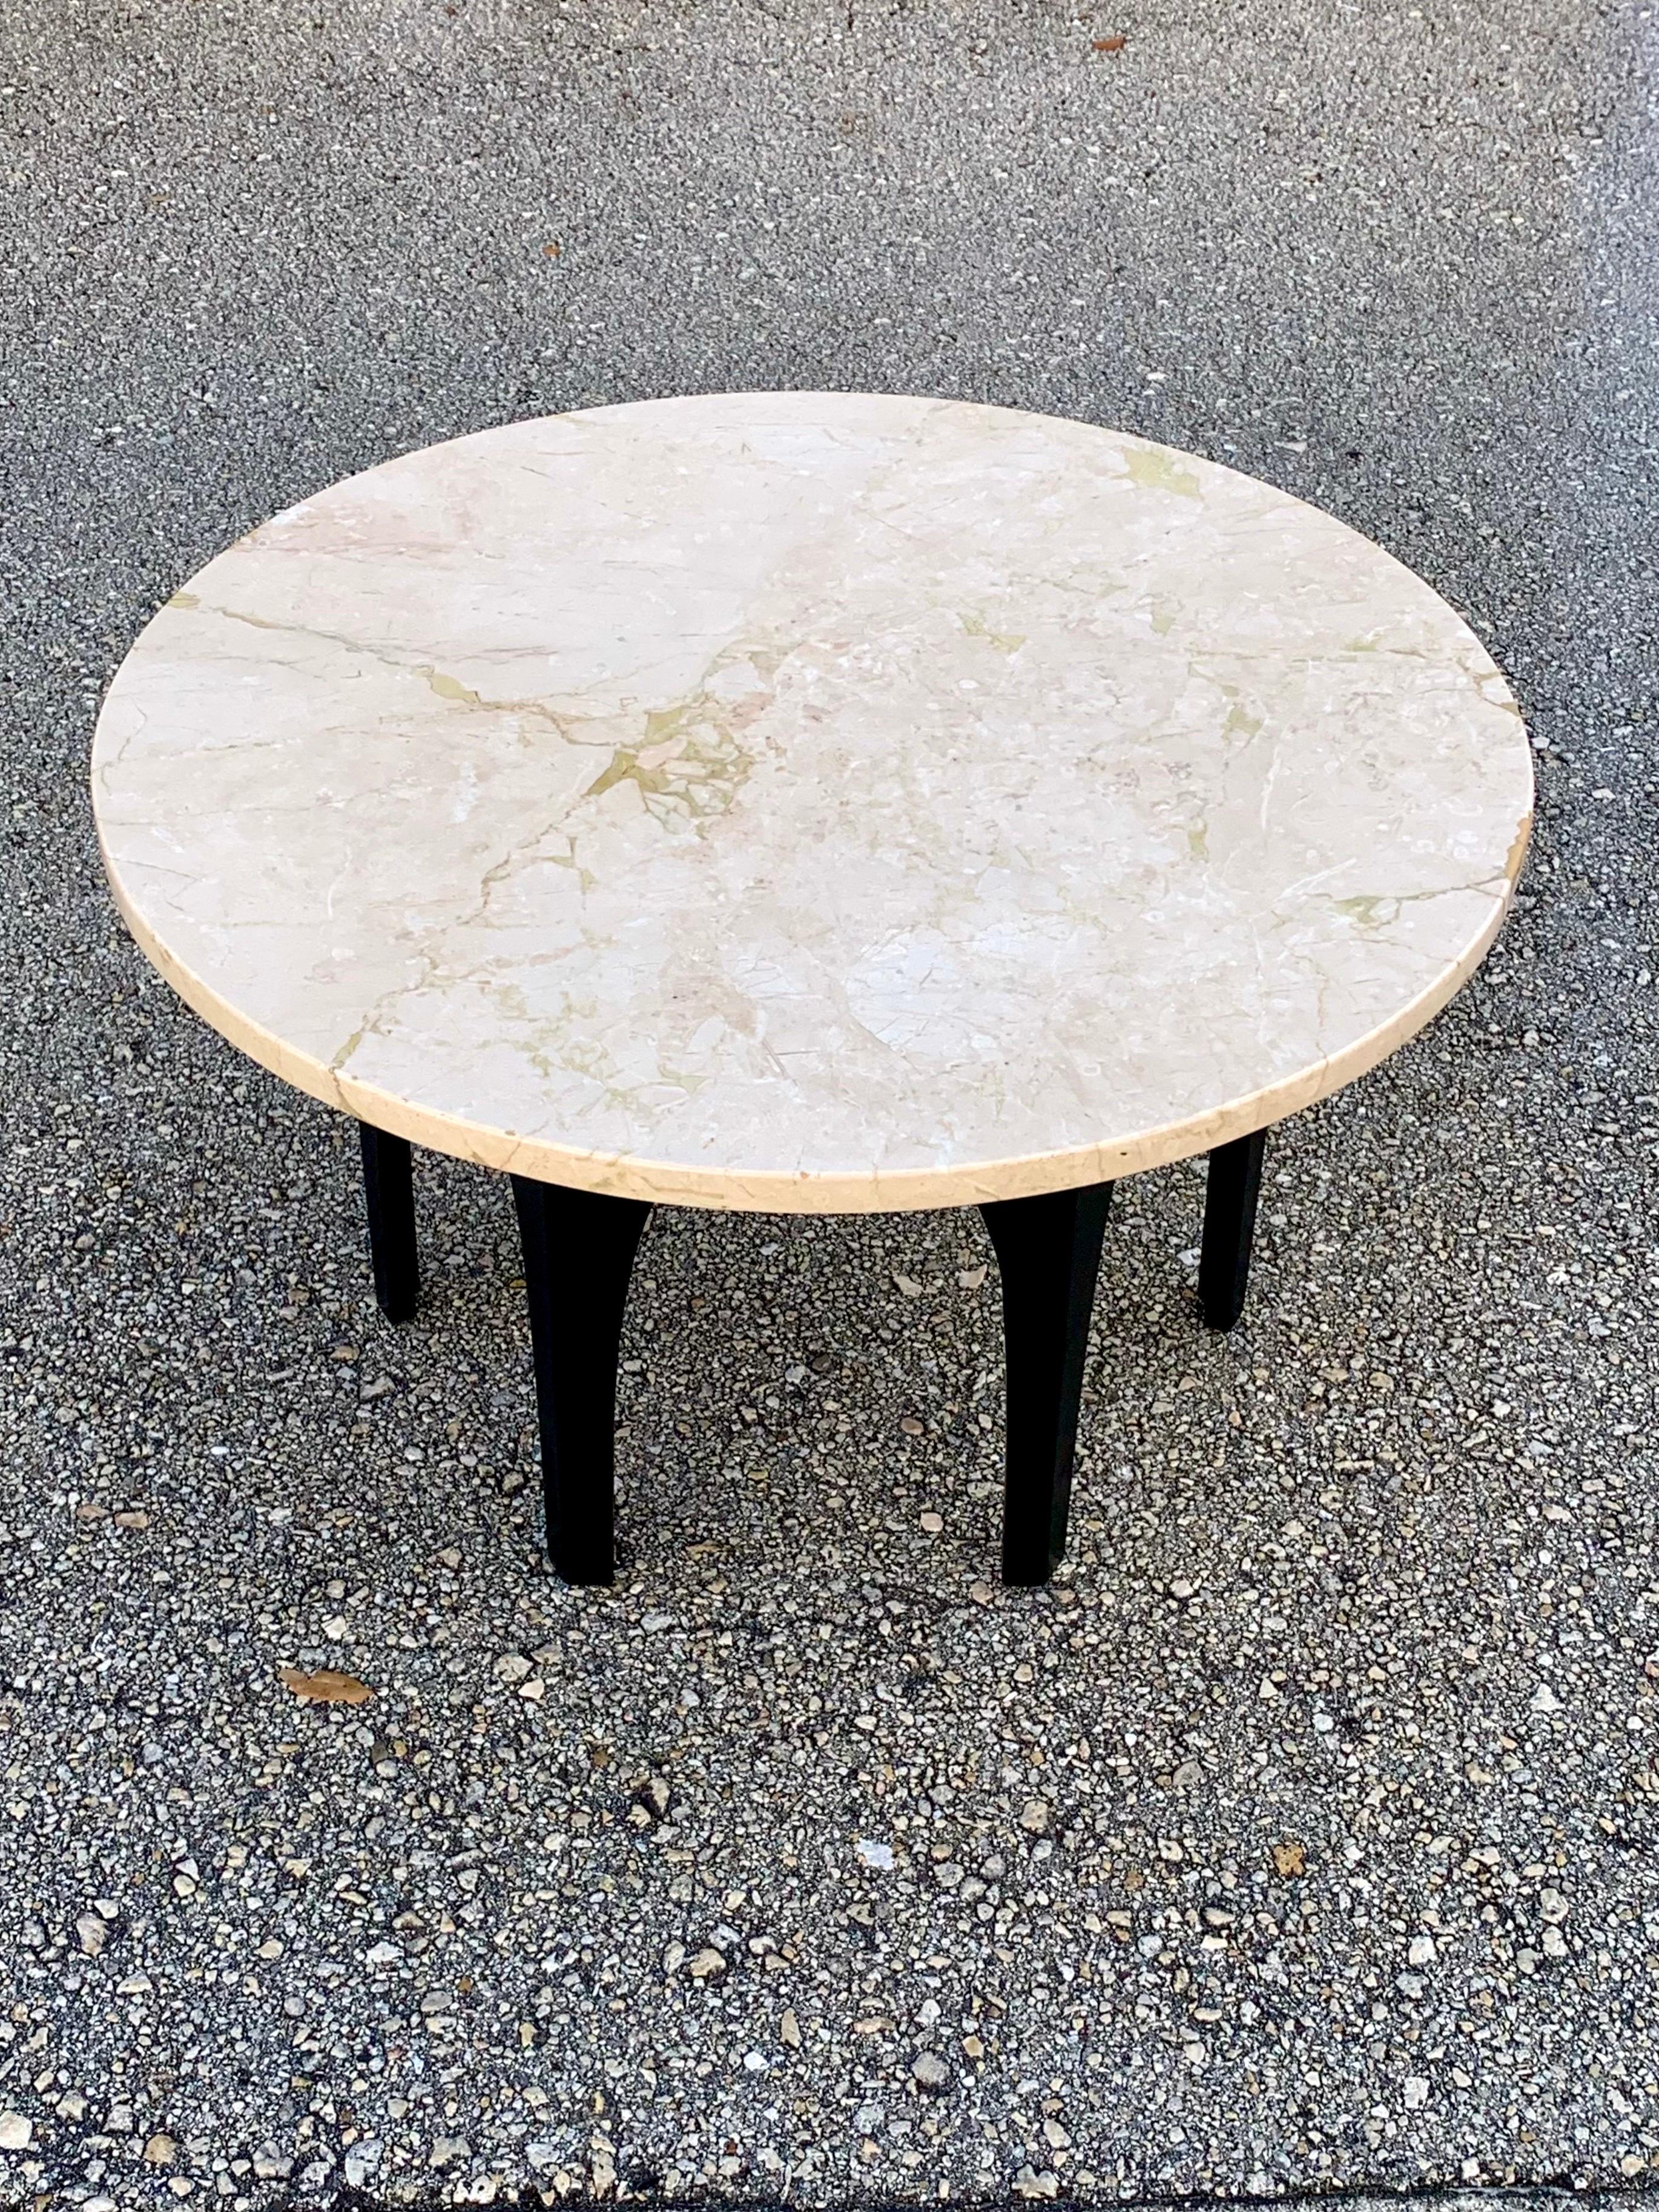 1960s coffee table by Harvey Probber. Two piece construction with the marble table top sitting on a base. A hexagon of wood with arches support the top. The base is engineered to be in this orientation but you could easily flip the base upside down